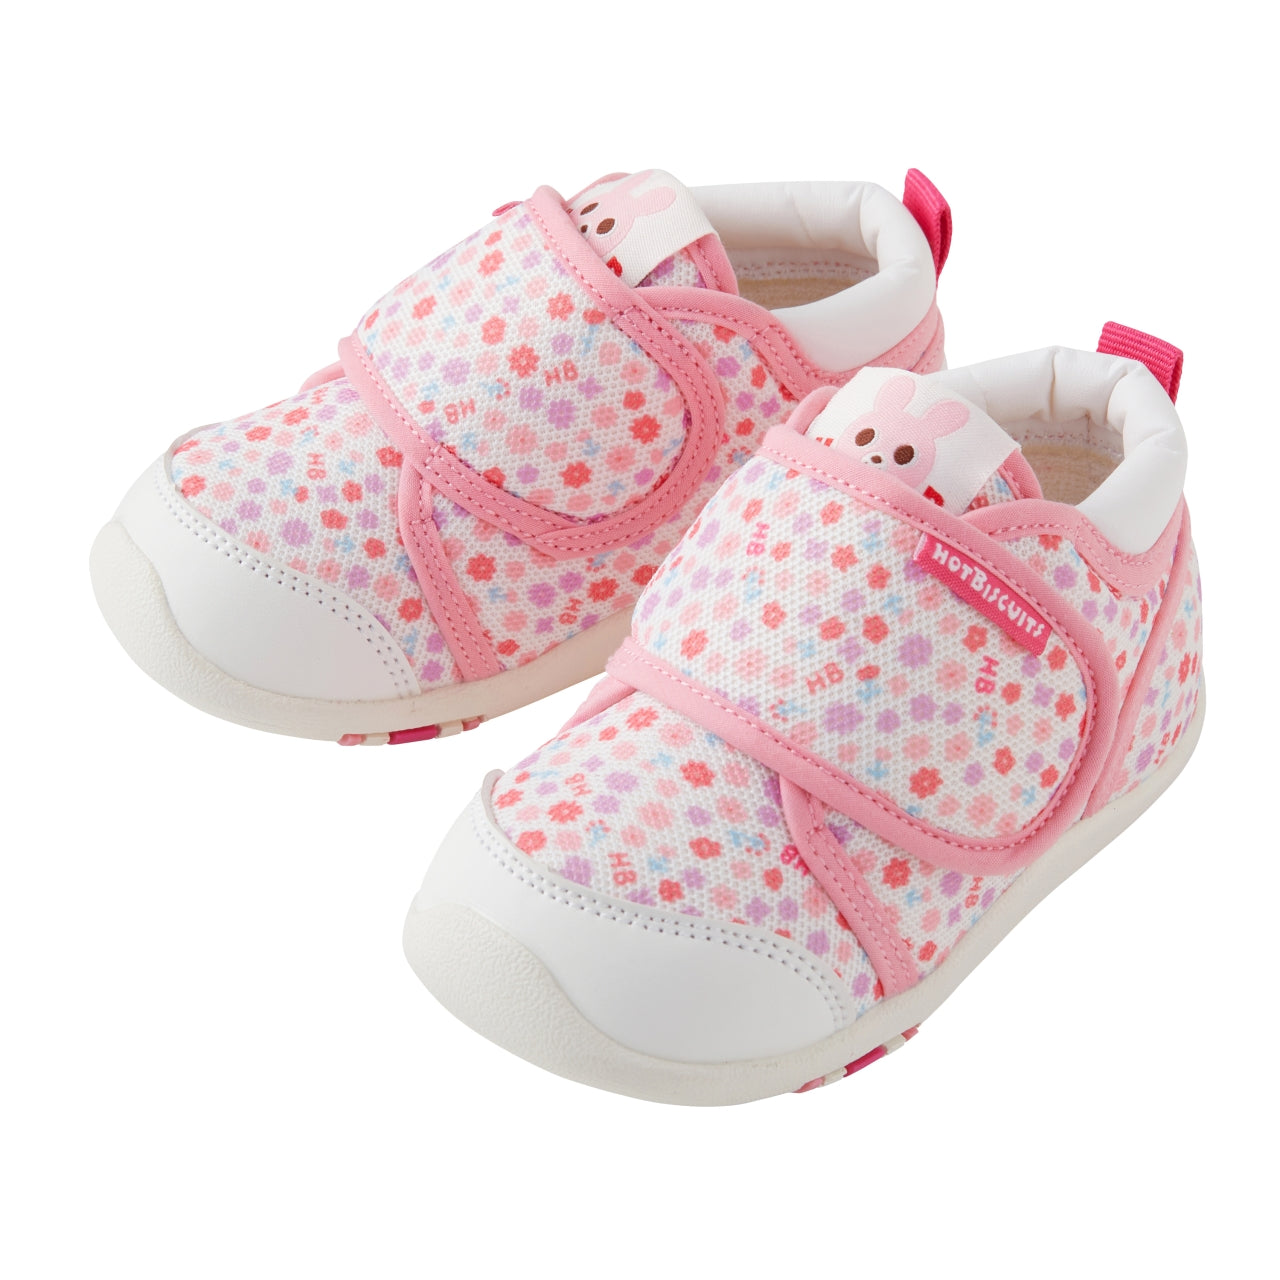 HB - Second Shoes - Pastel Blossom